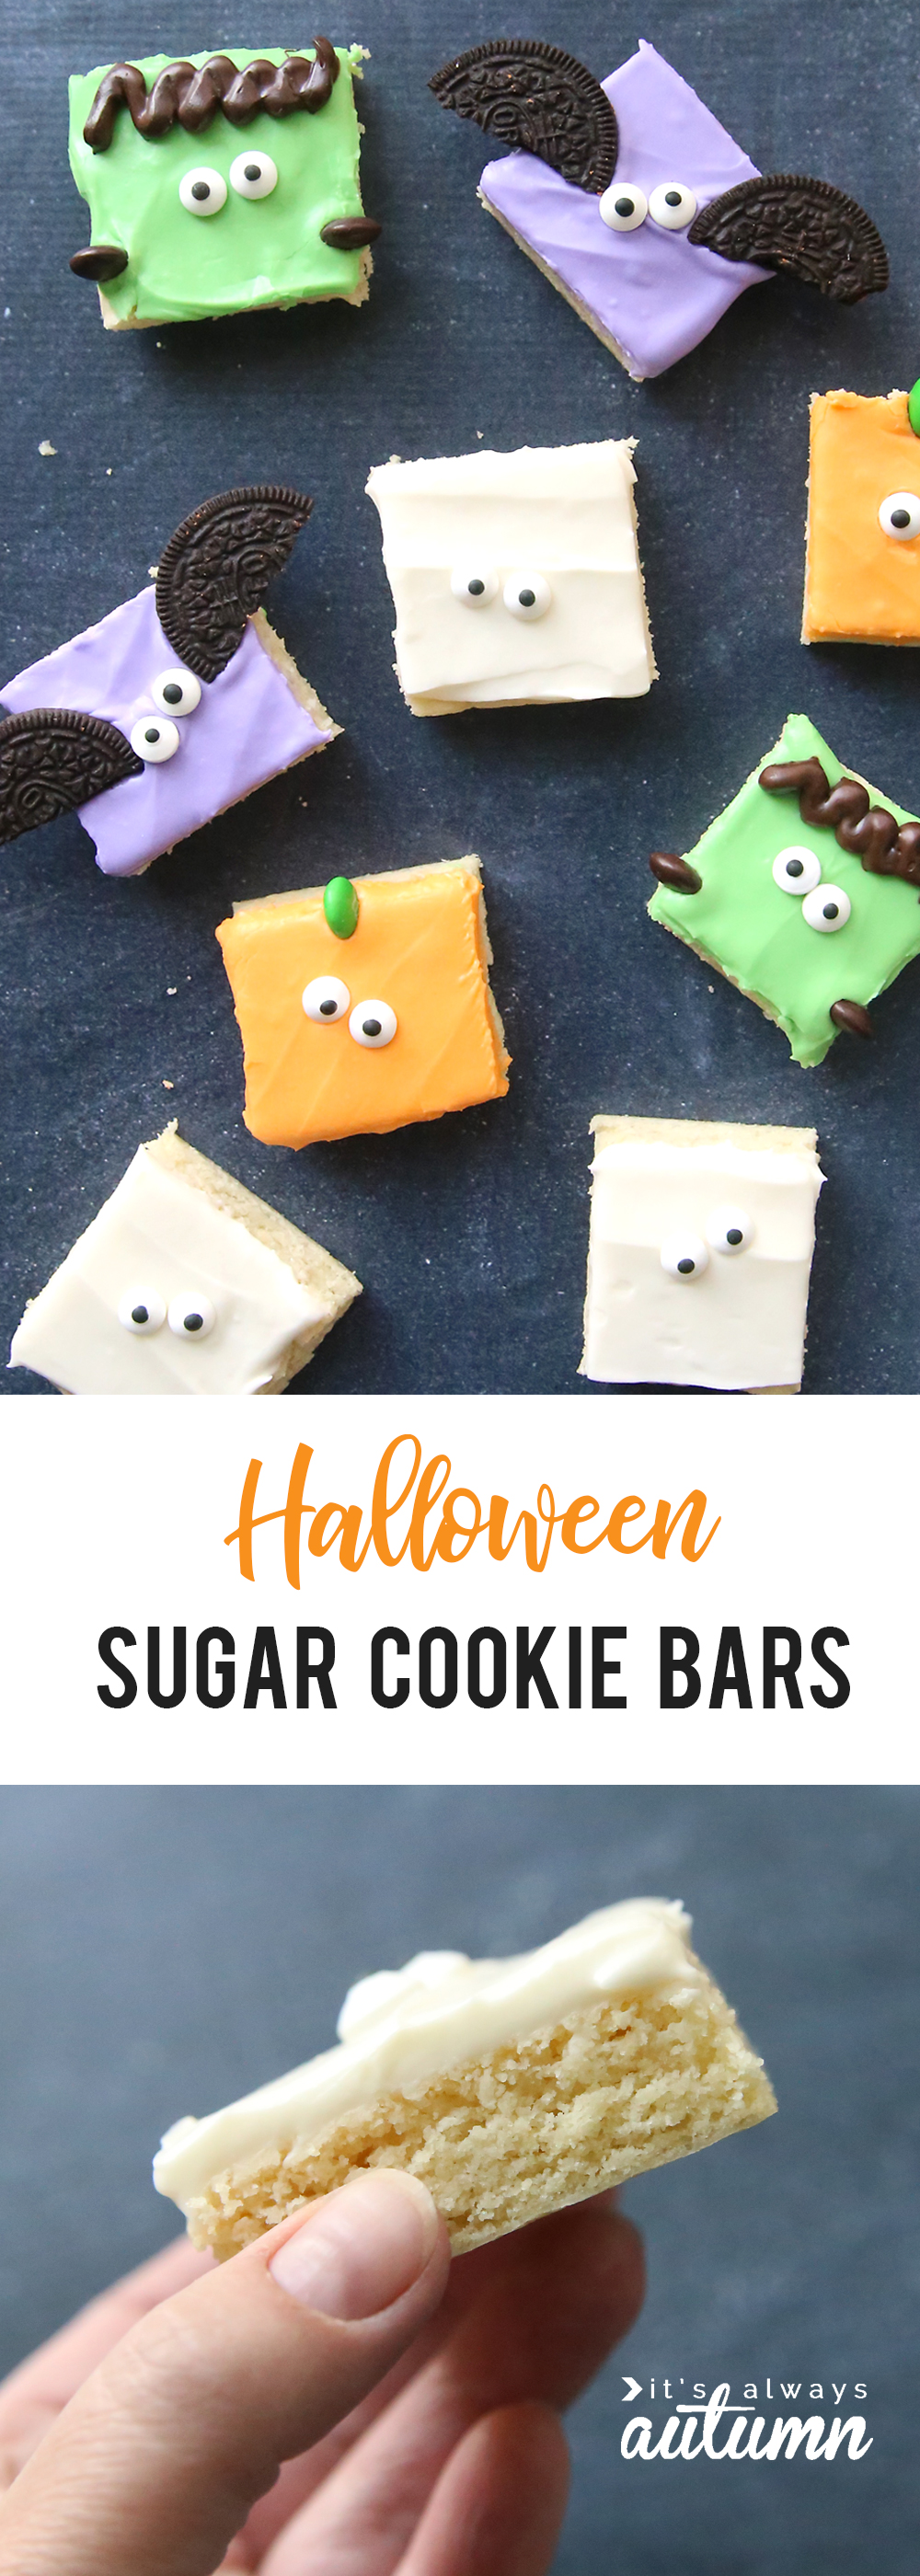 Sugar cookie bars frosted to look like Halloween characters